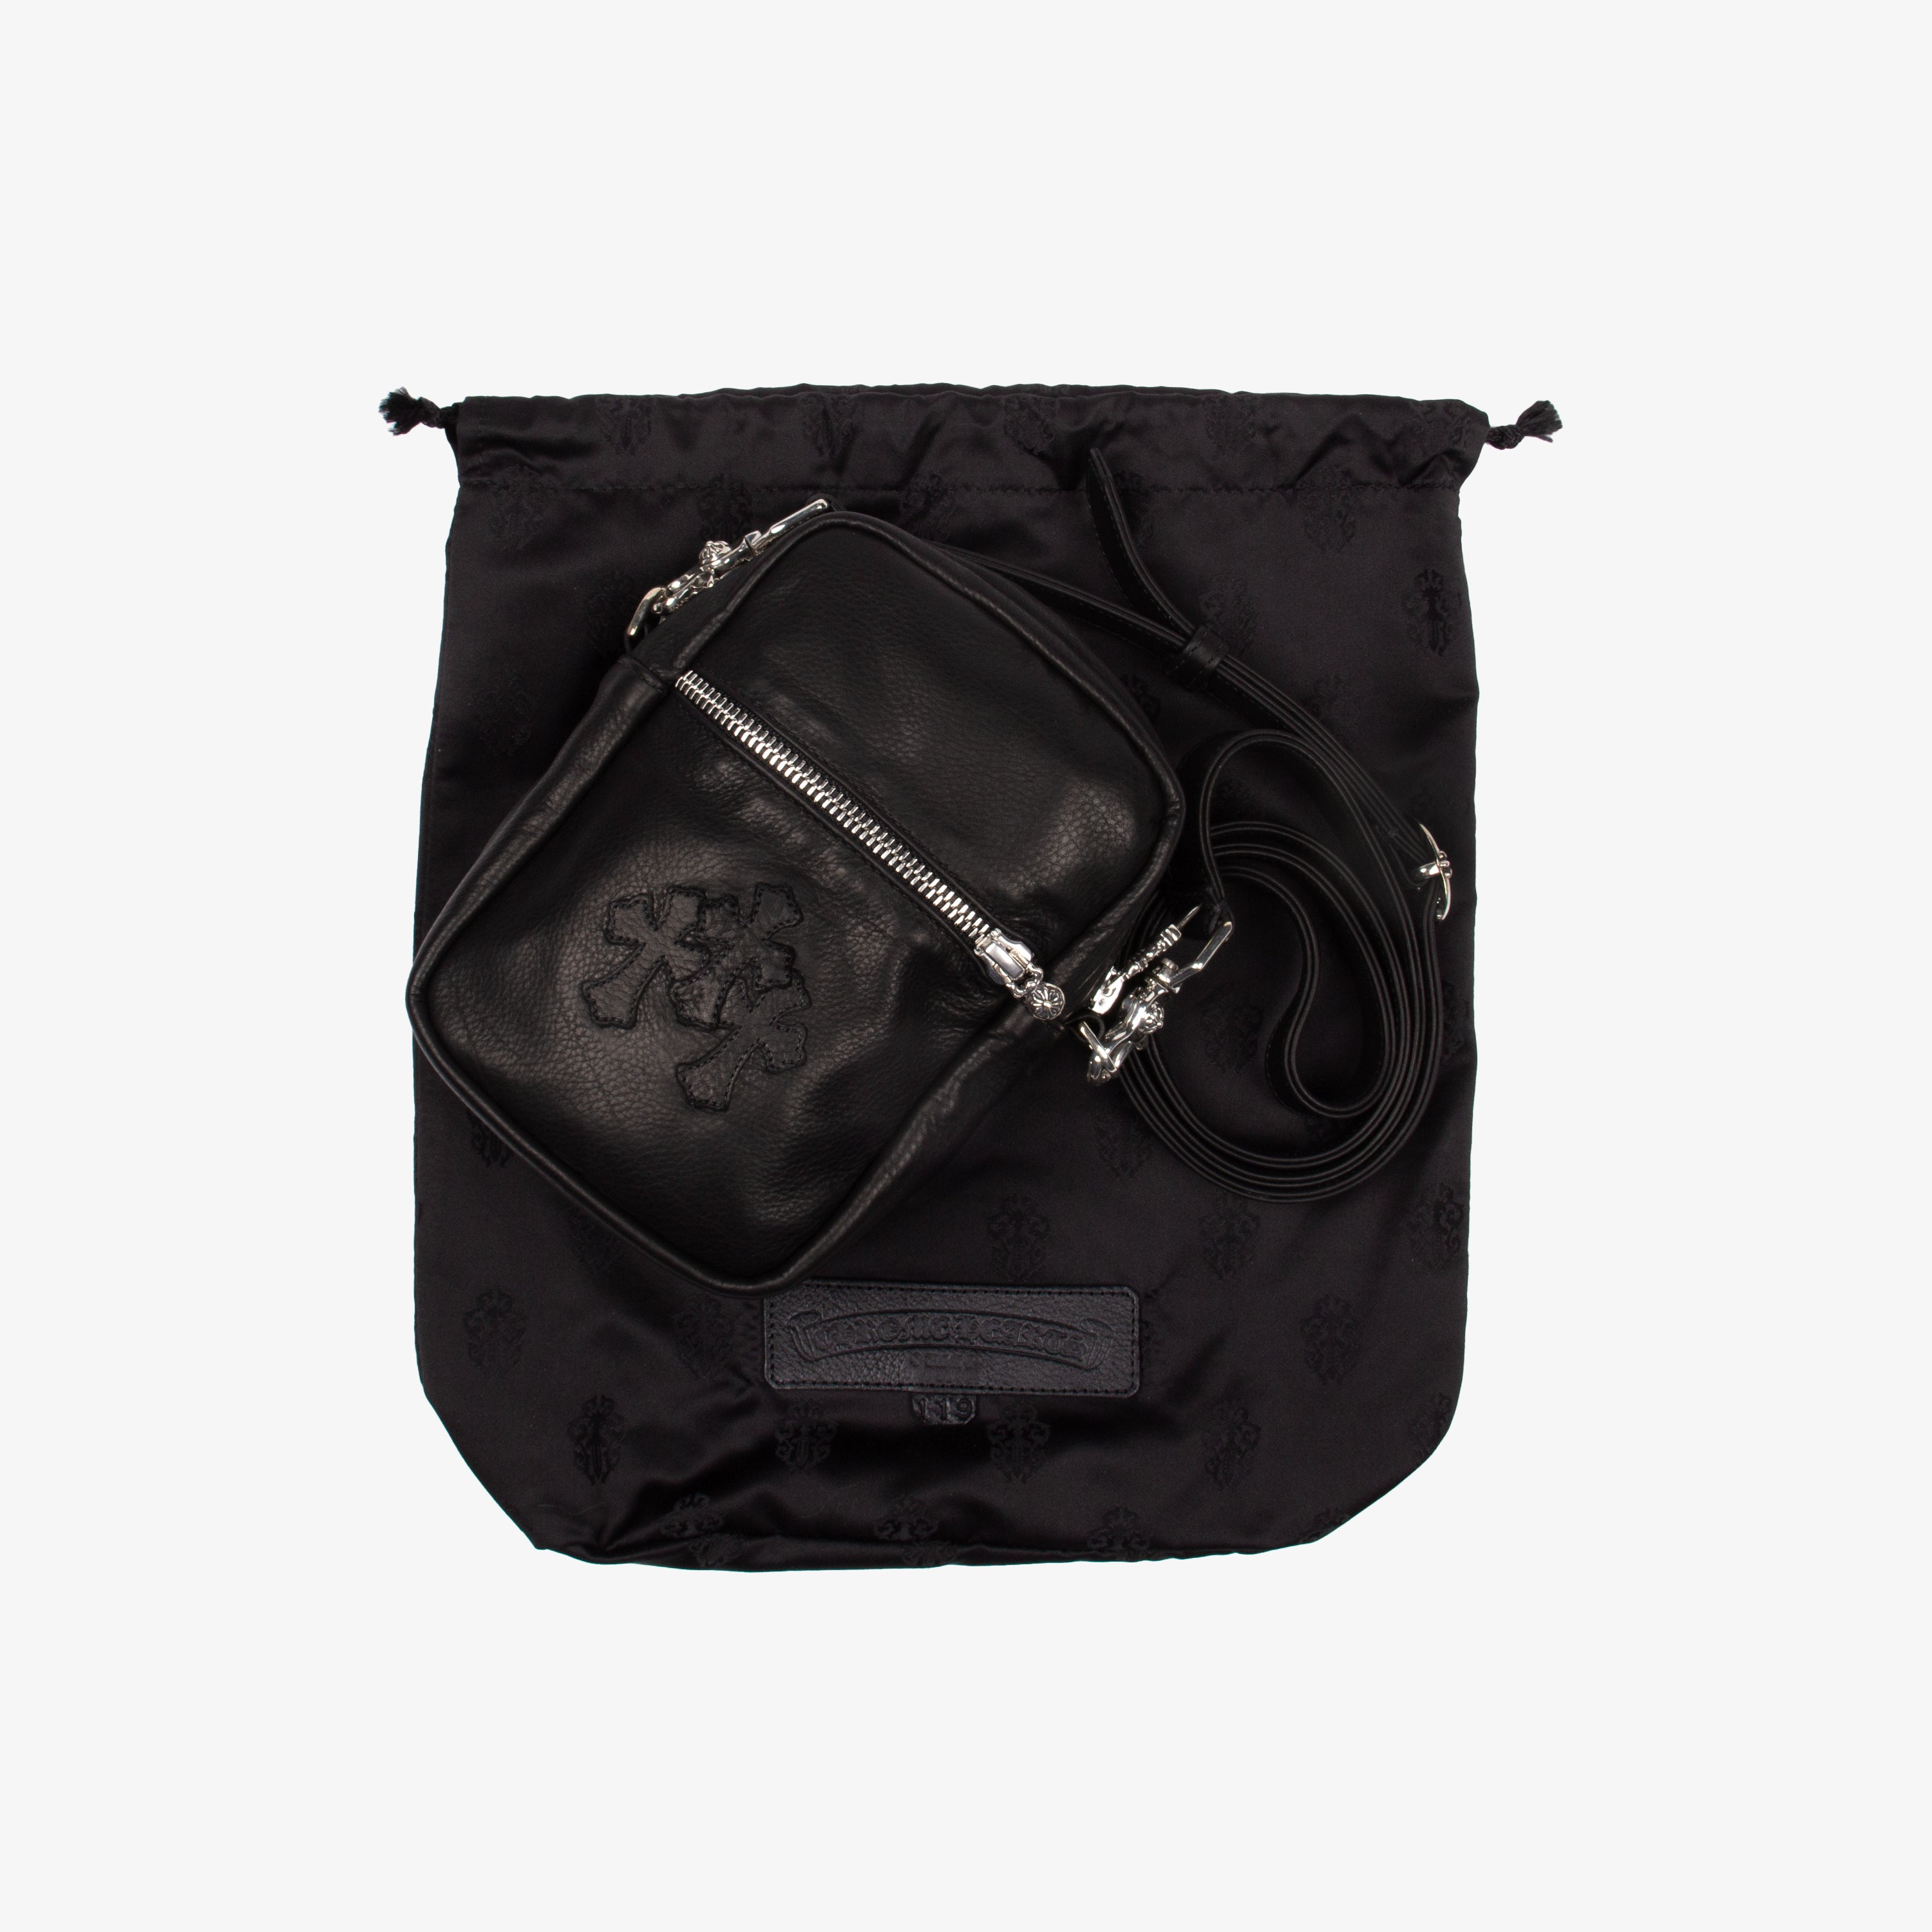 BLACKED OUT LEATHER TAKA BAG